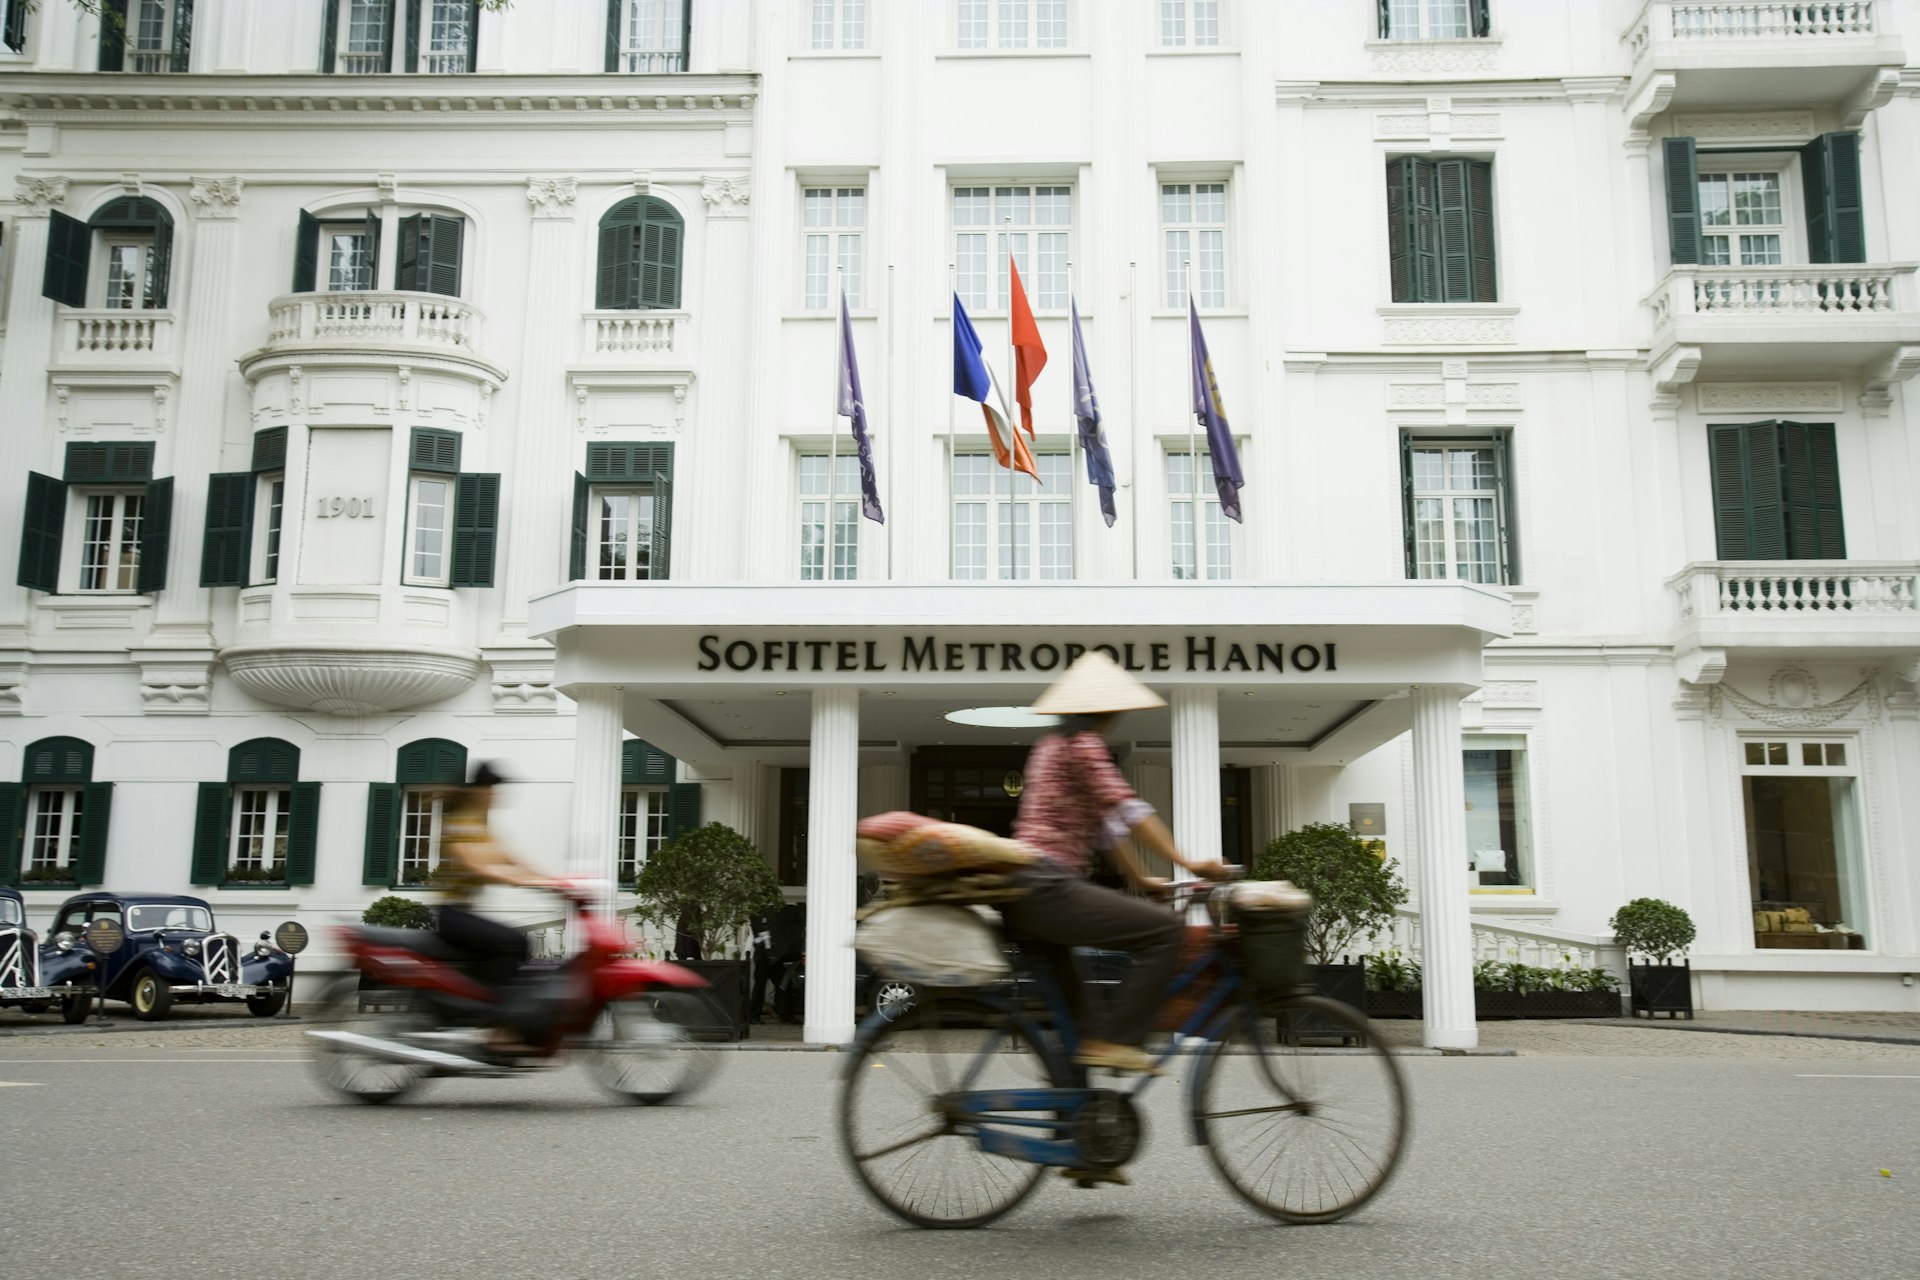 A man on a bicycle rides past a fancy colonial-era building in Hanoi's French Quarter.